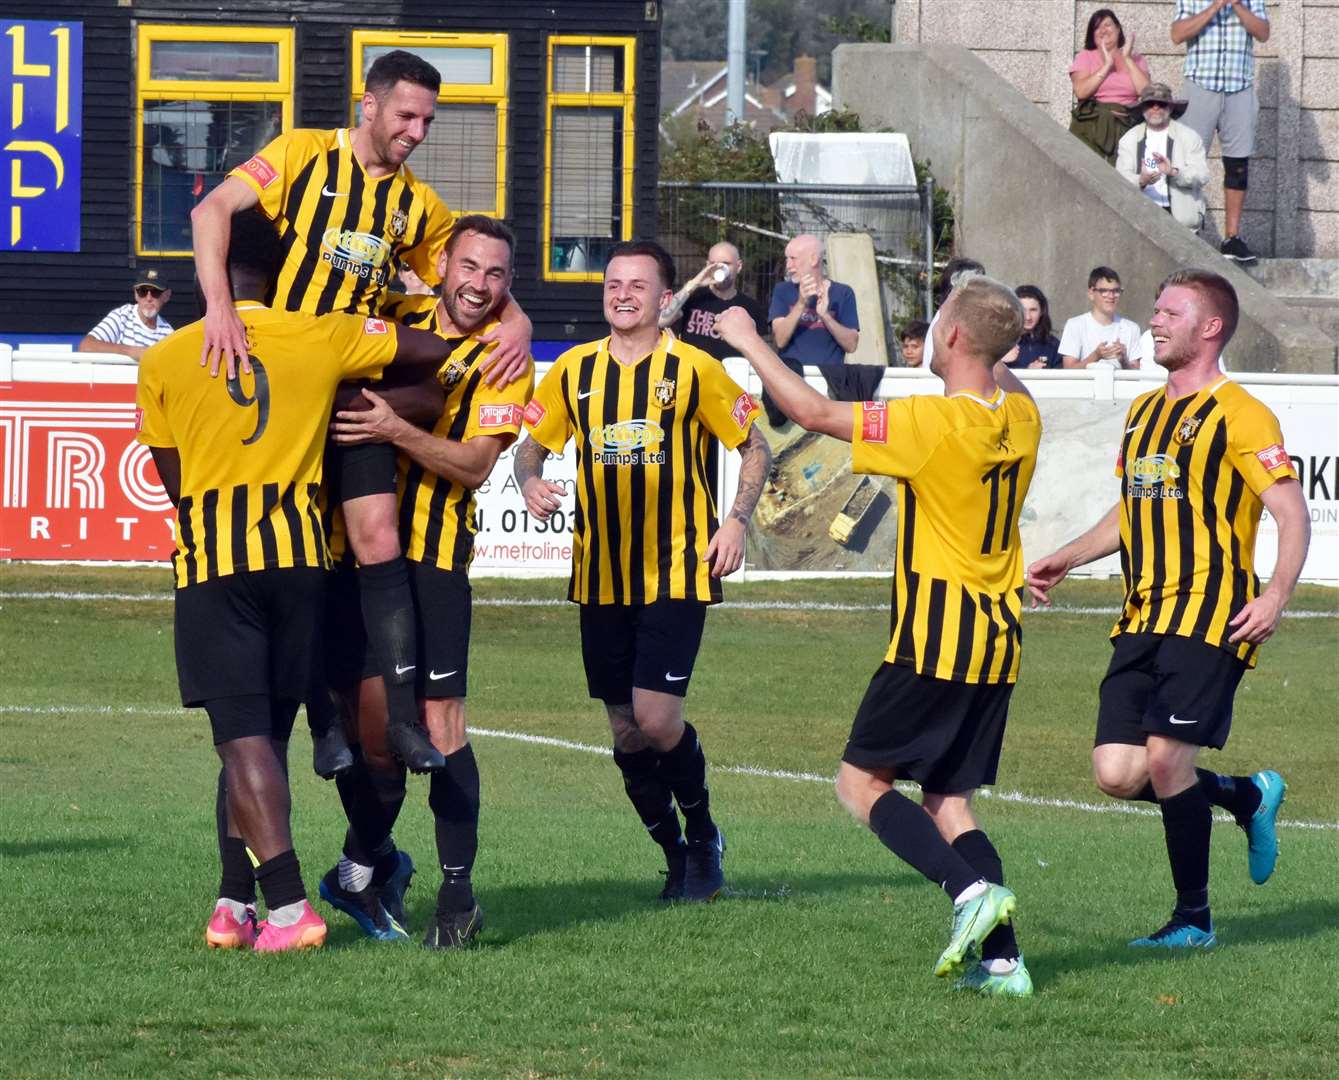 Folkestone celebrate Ian Draycott's 142nd goal - a club record - against Potters Bar in September last year Picture: Randolph File